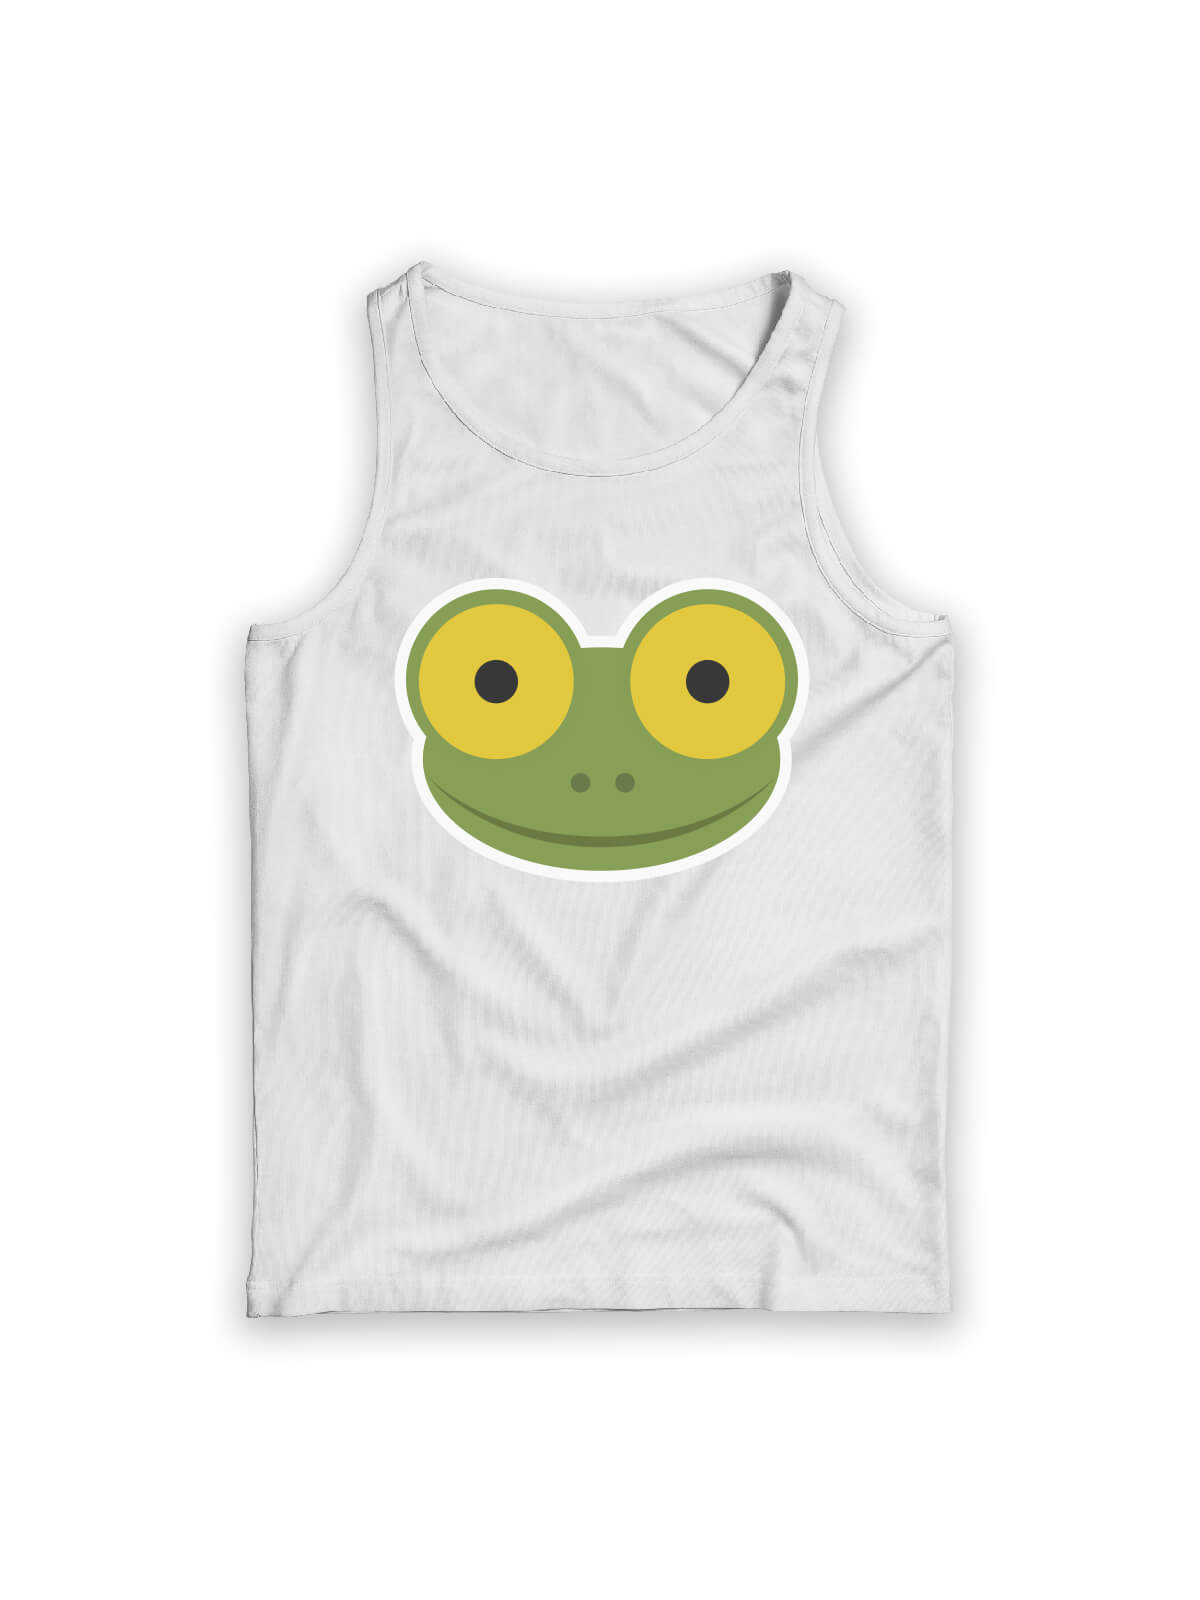 white t-shirt with Mike the frog face